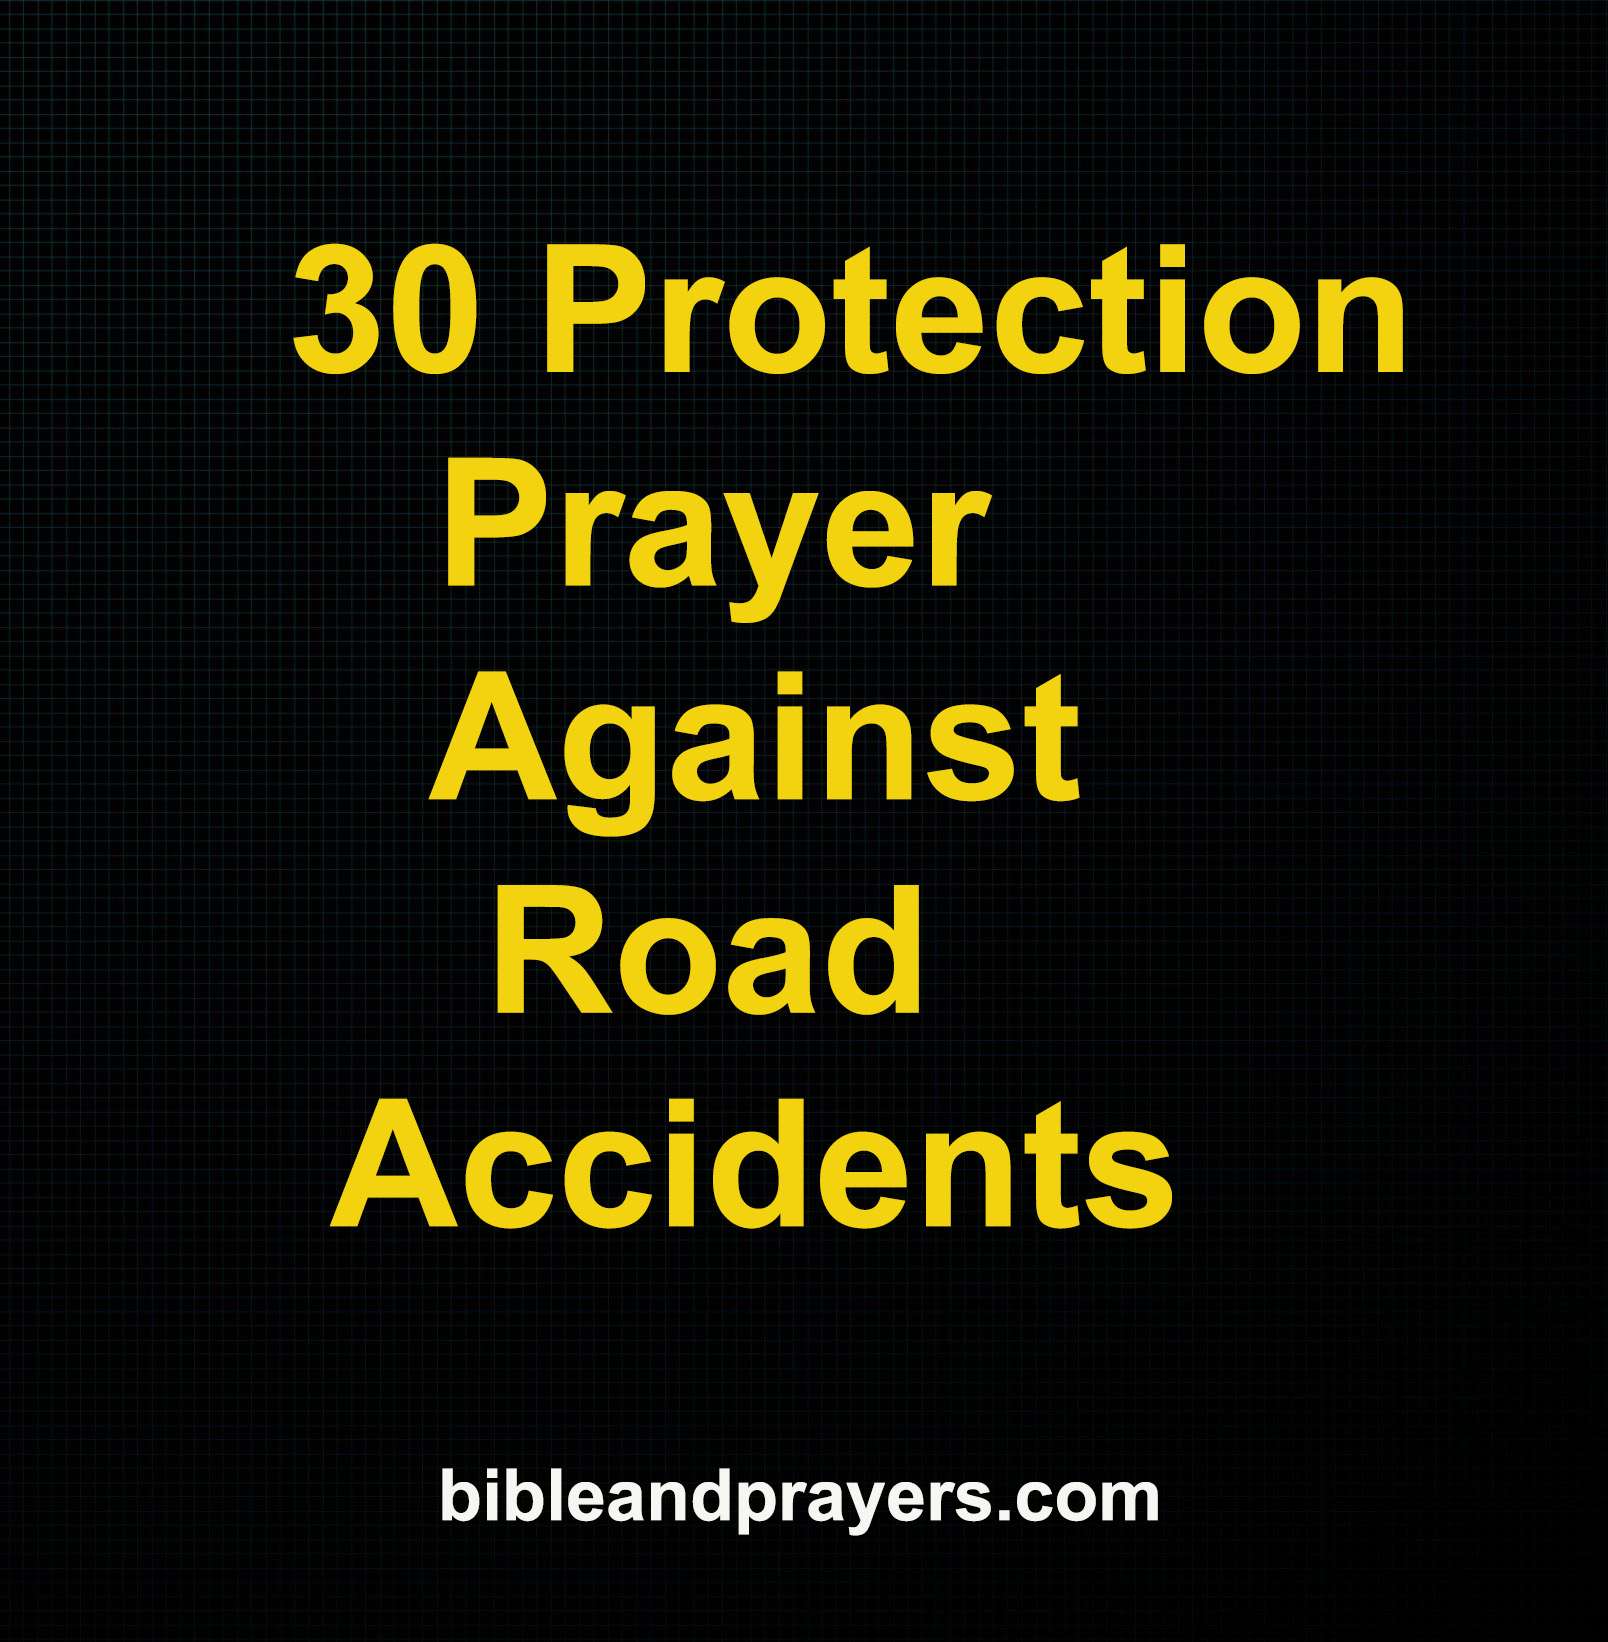 30 Protection Prayer Against Road Accidents